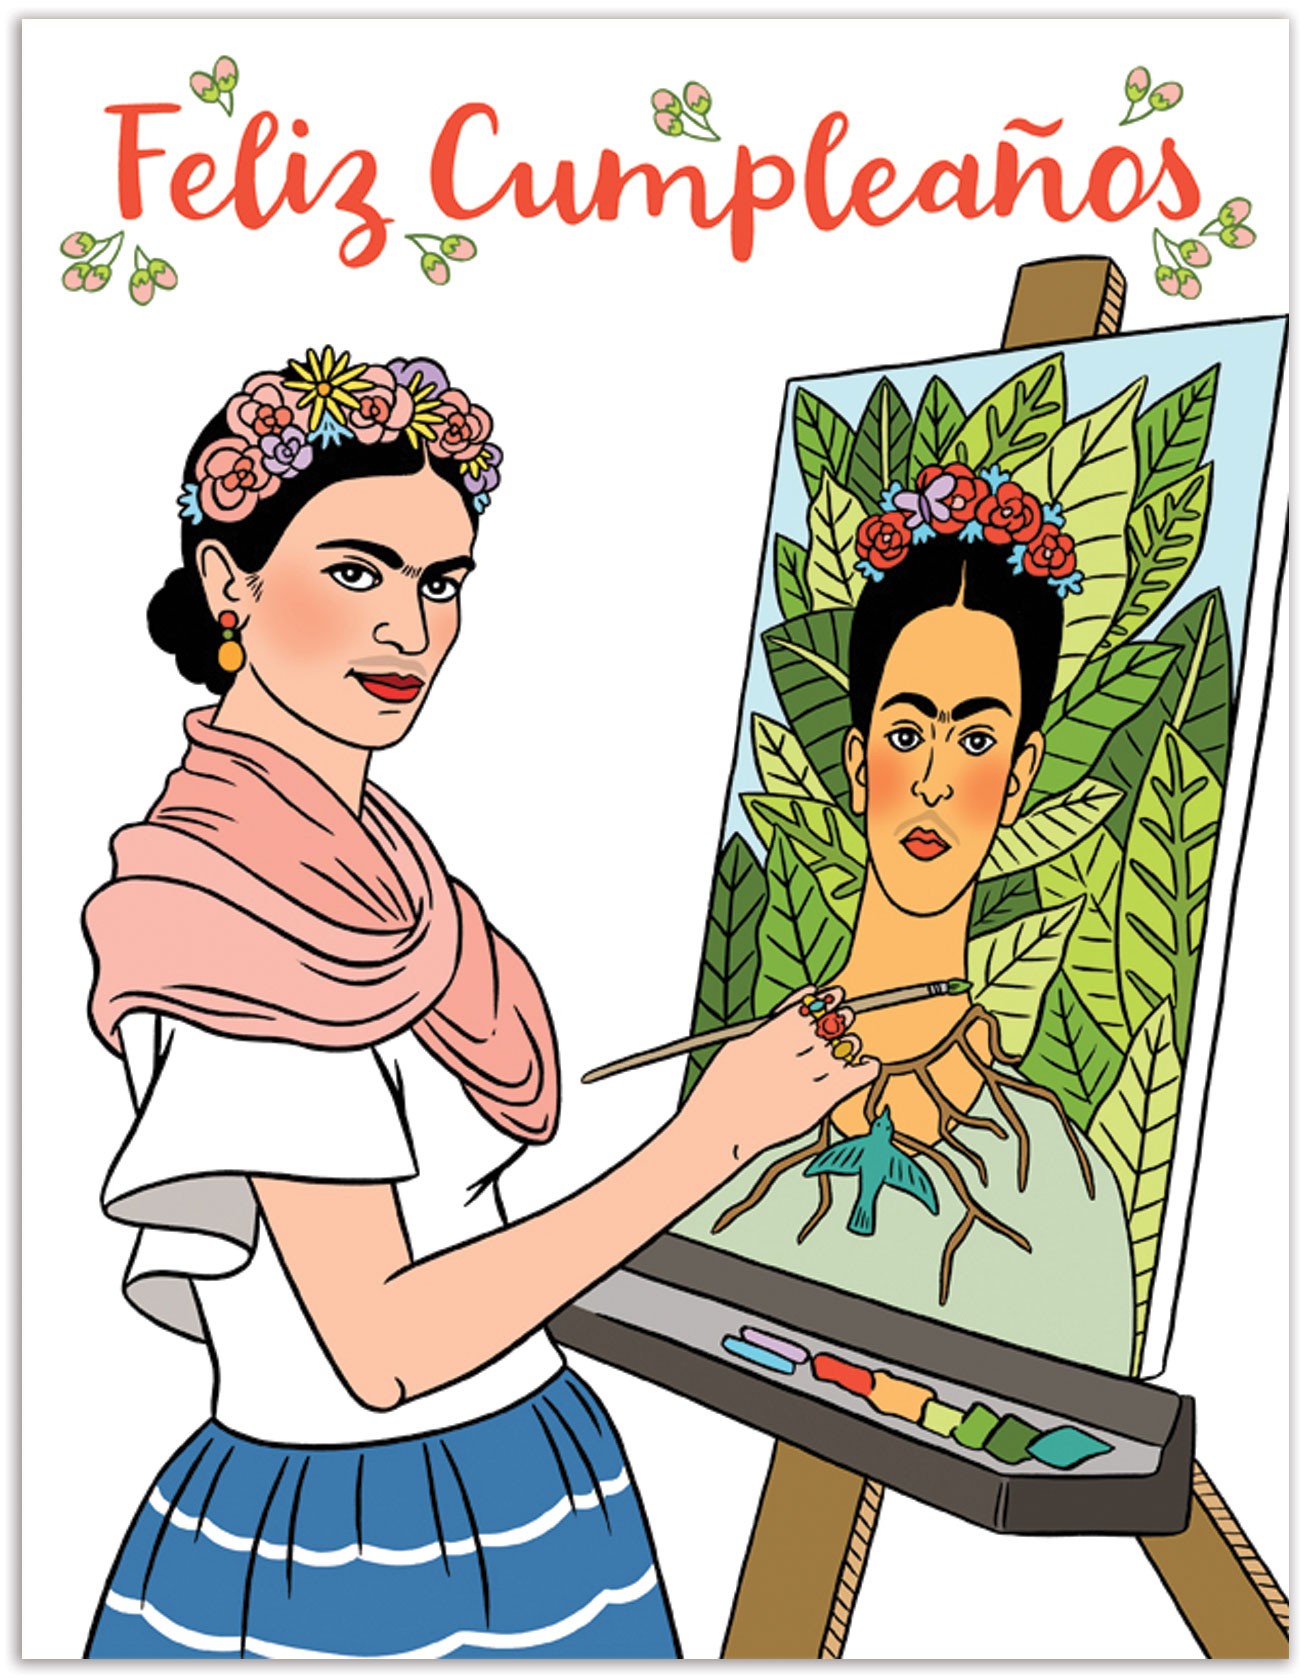 A colorful, illustrated birthday card shows Frida Kahlo at an easel, painting a self-portrait. Above her, in cursive script, is the phrase 